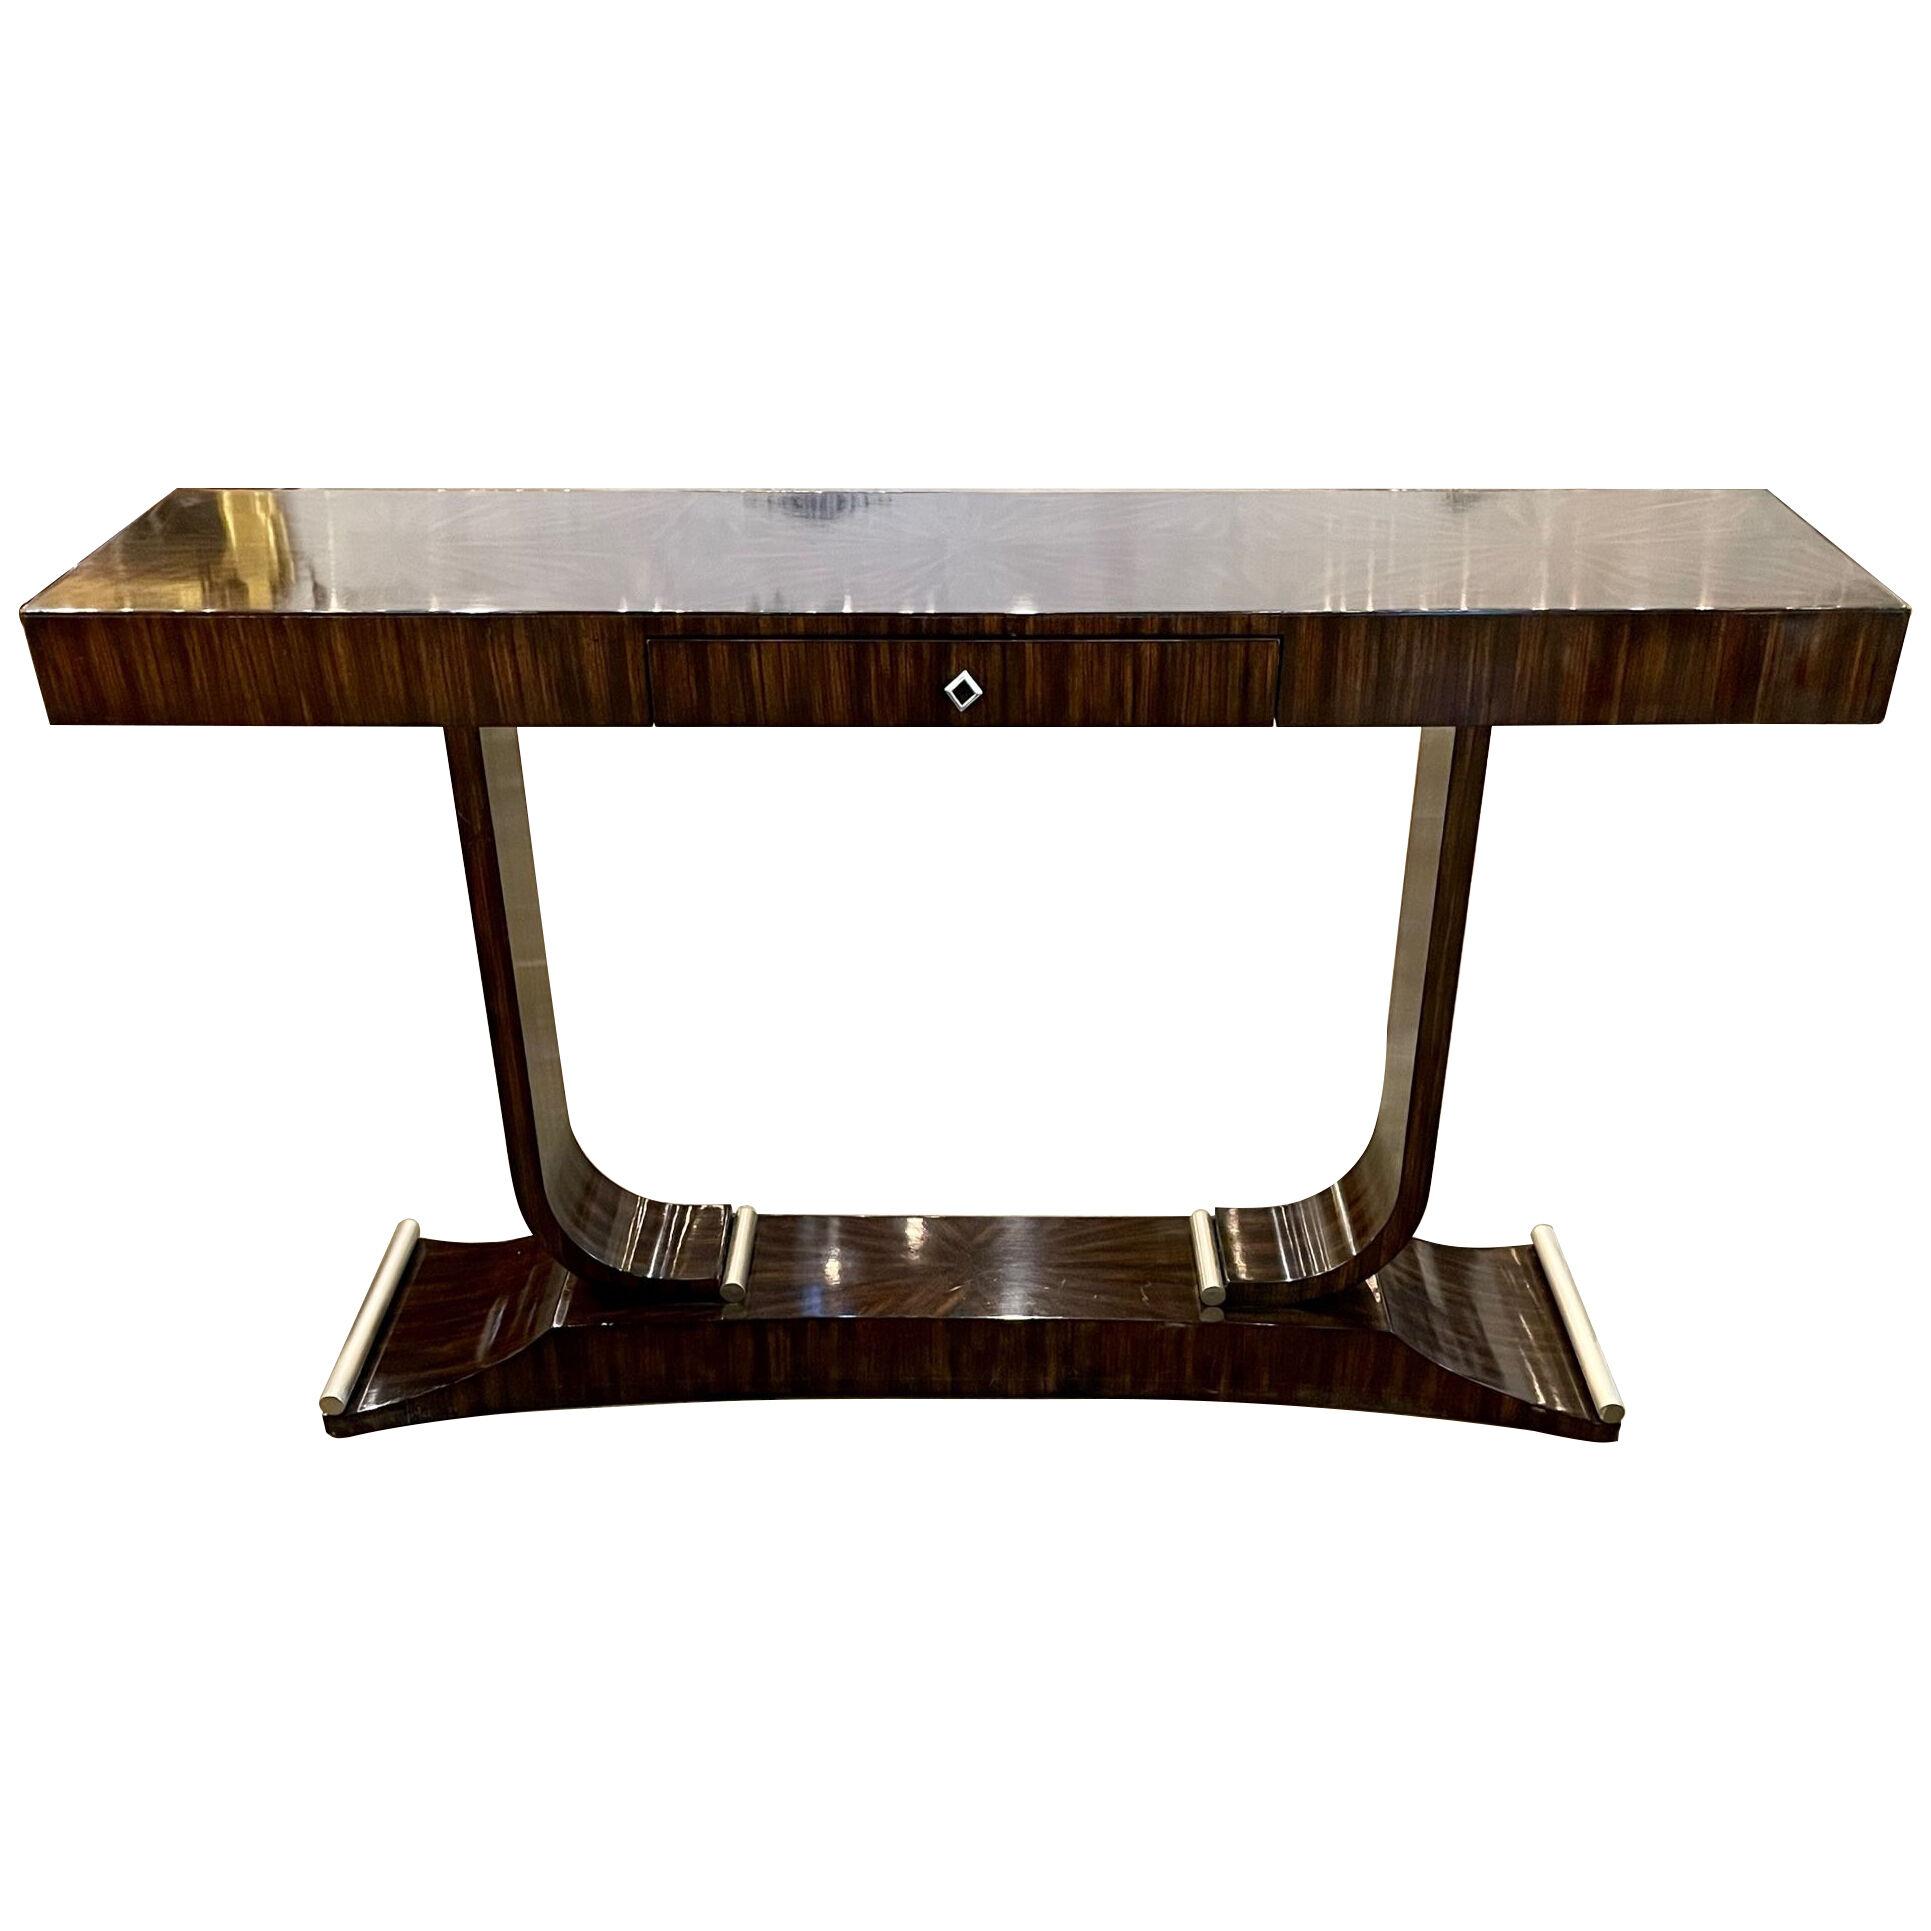 Vintage Art Deco Style Console by Maitland Smith